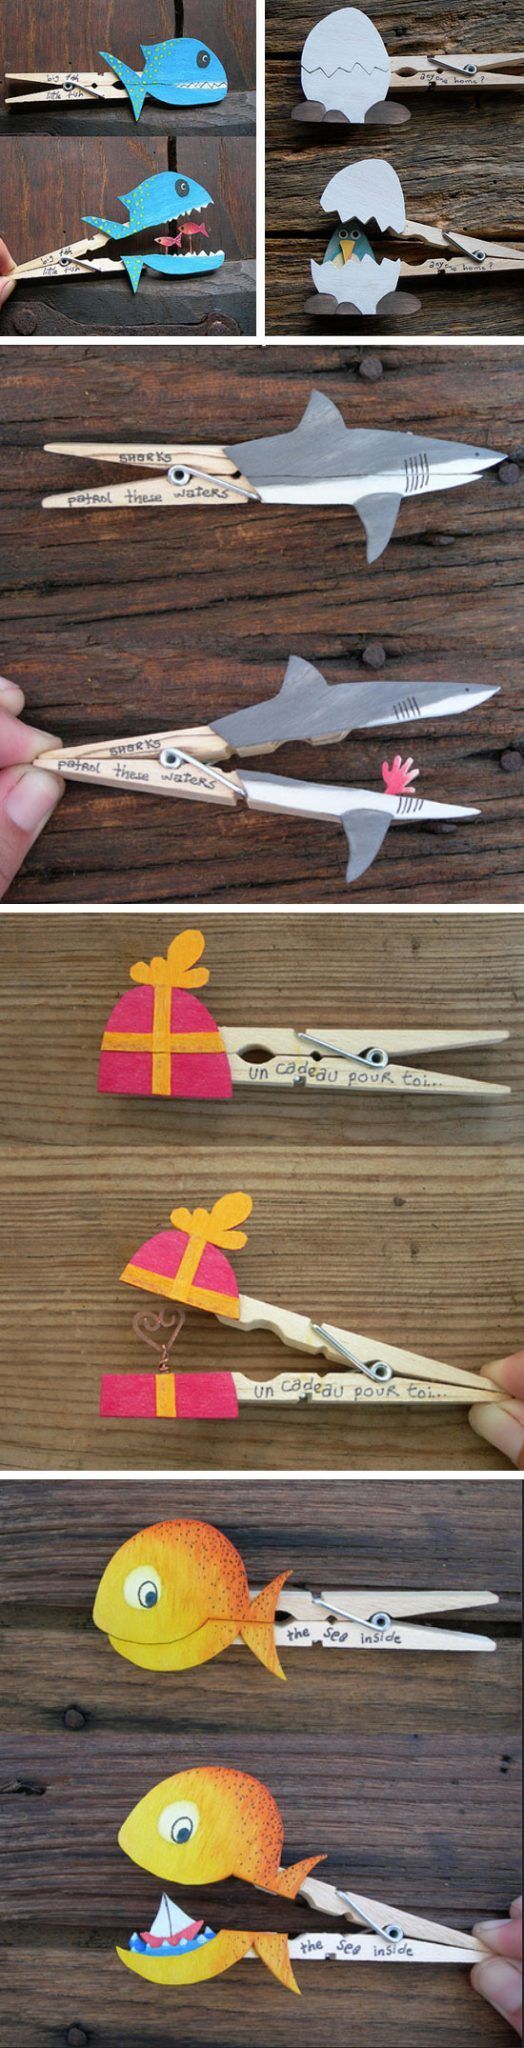 Clothes Peg Crafts | 18 DIY Summer Art Projects for Kids to Make | Easy Art…